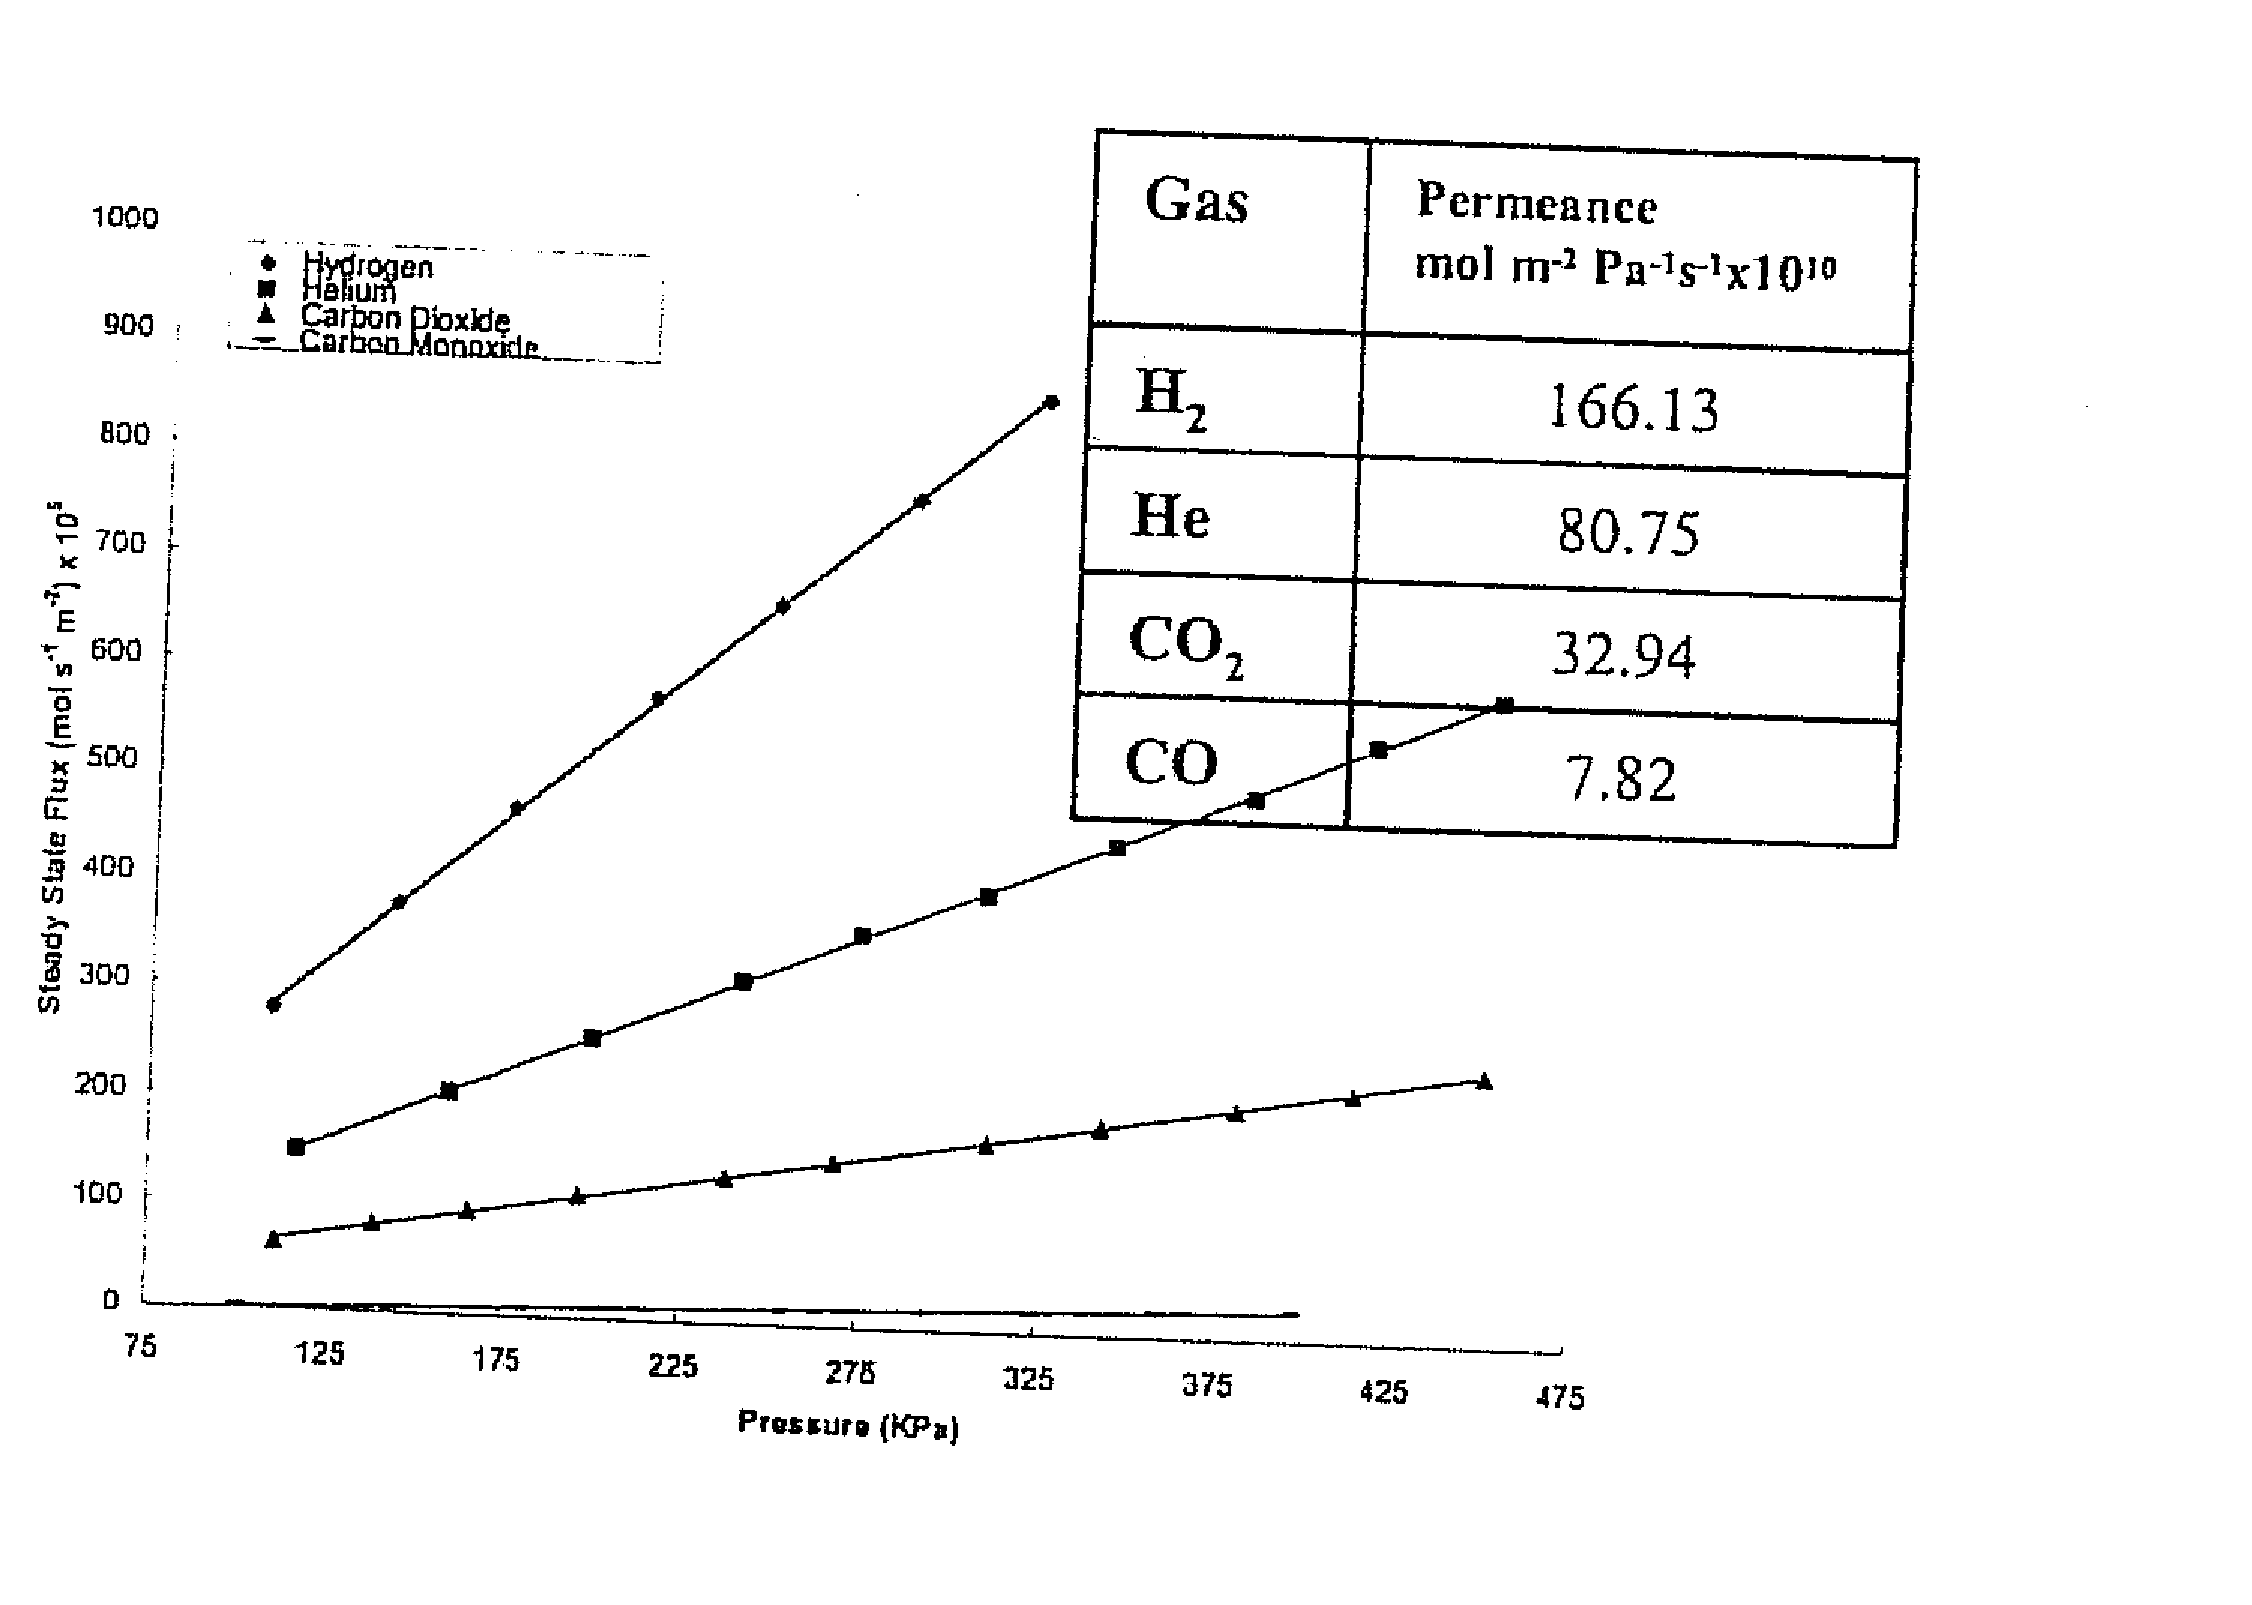 Carbon nanocomposite membranes and methods for their fabrication